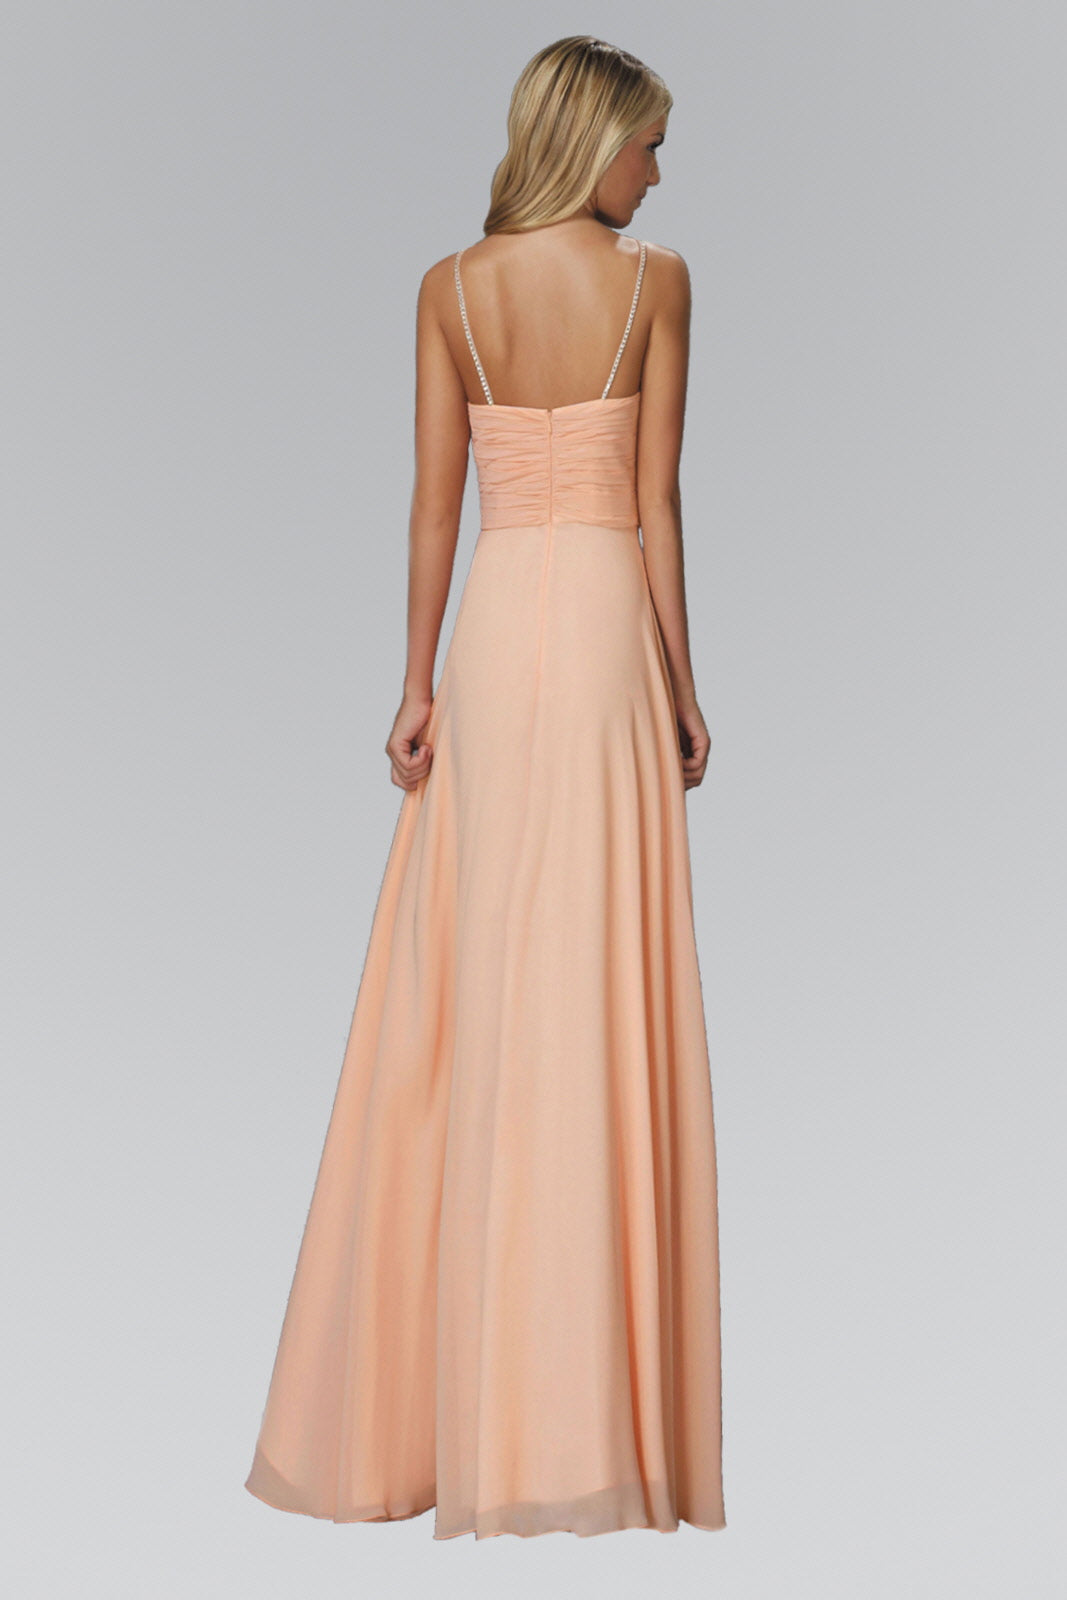 Spaghetti Straps Long Chiffon Dress Accented with Bead and Jewel GLGL2027 Elsy Style PROM